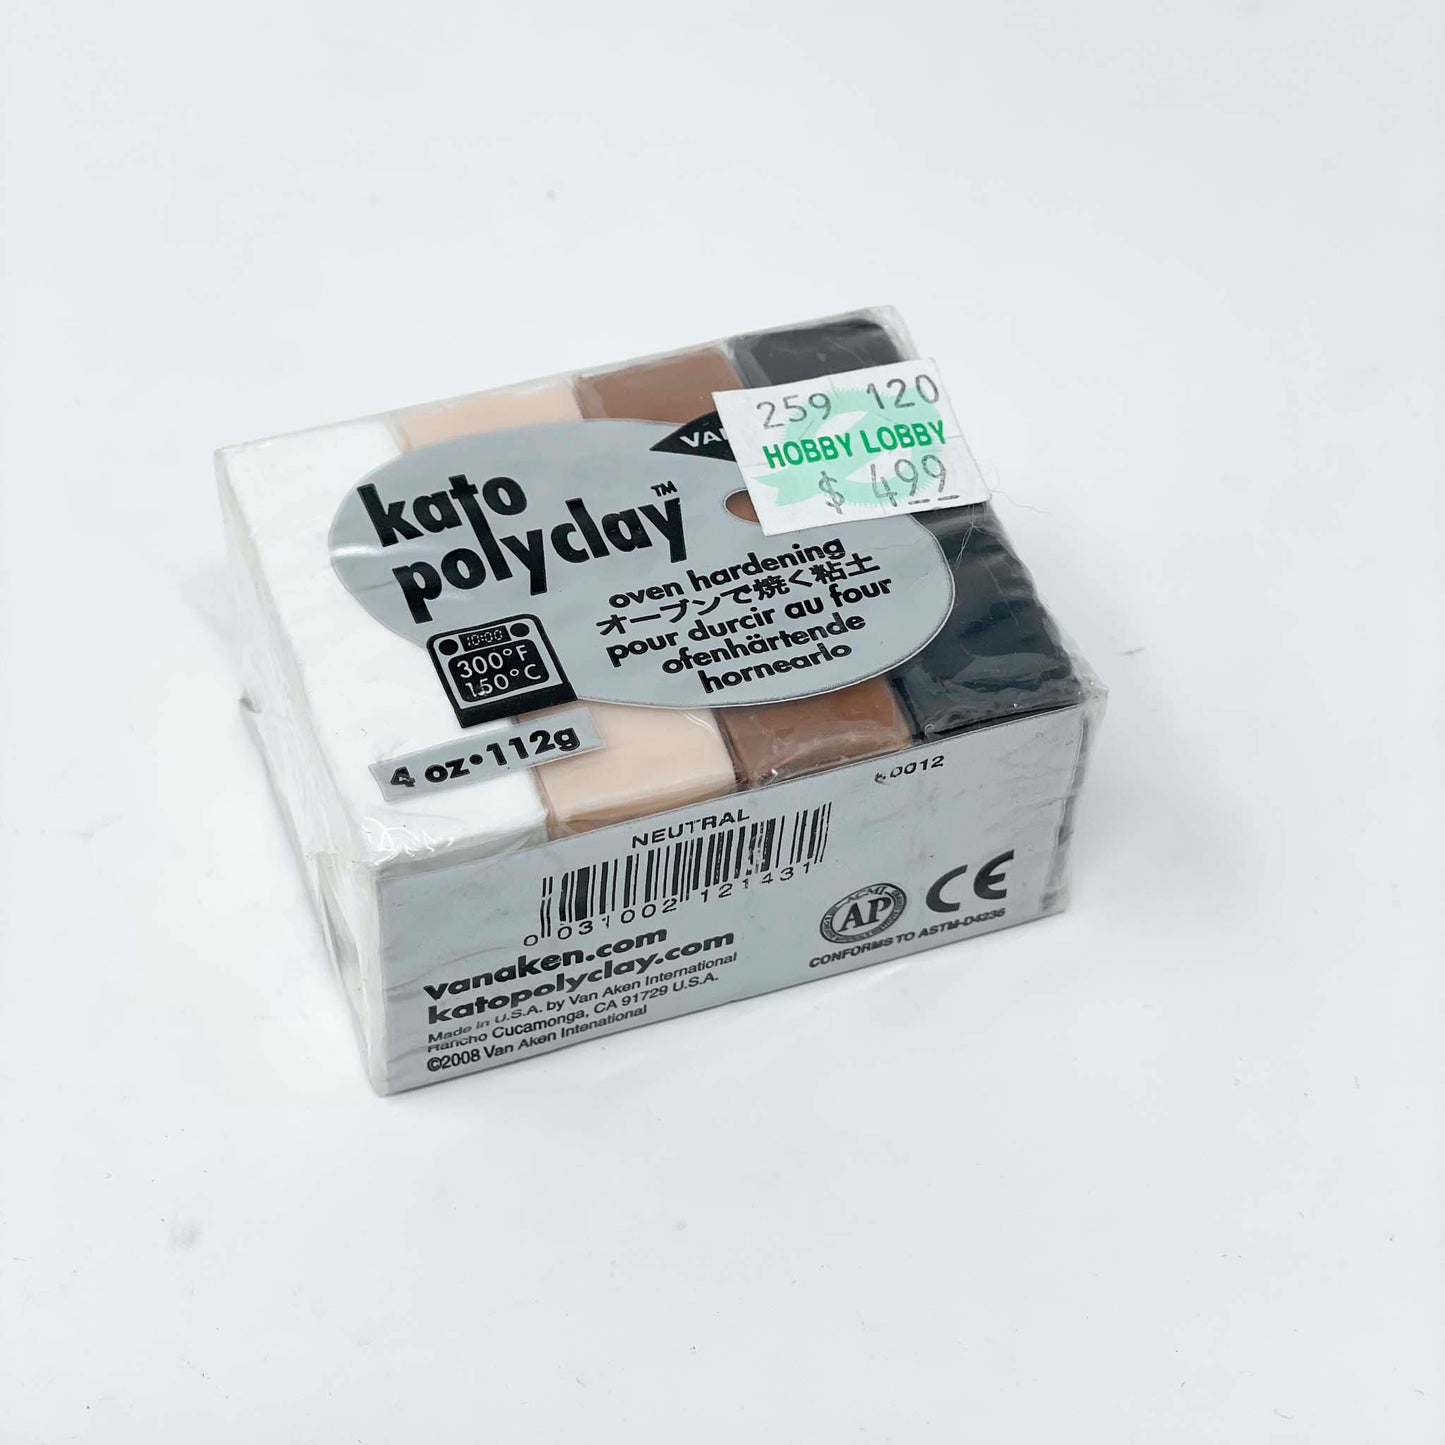 Kato Polyclay in Neutral Colors